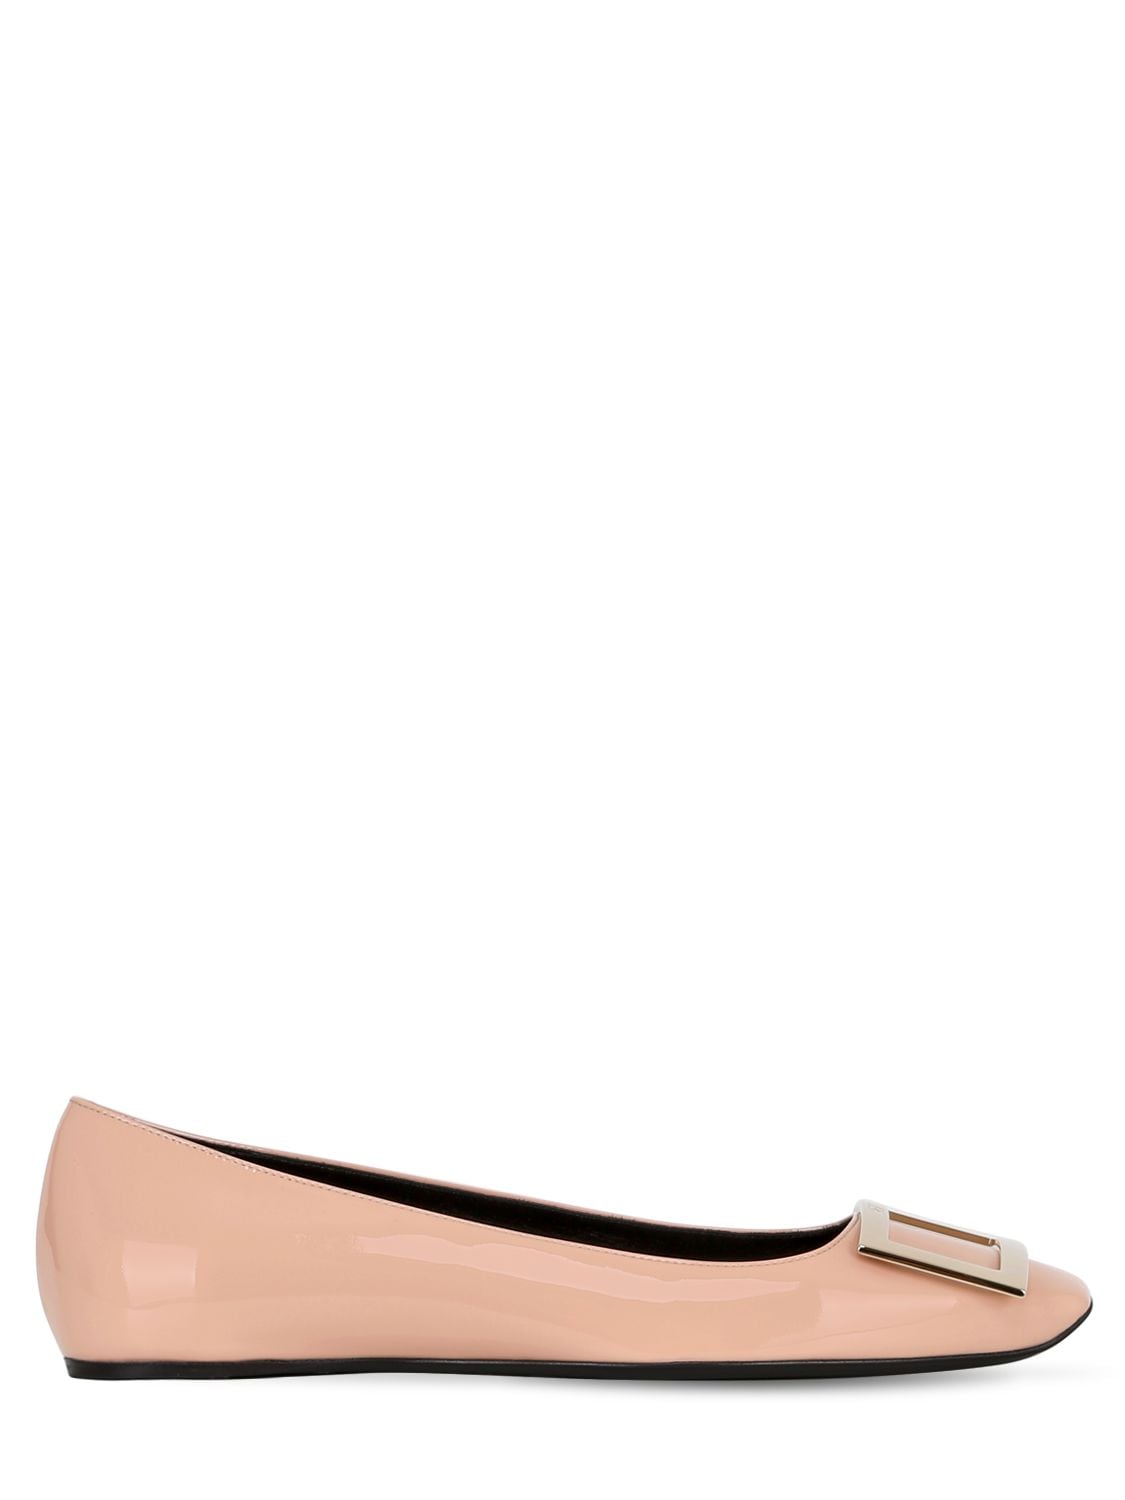 Roger Vivier 10mm Trompette Patent Leather Flats In Nude